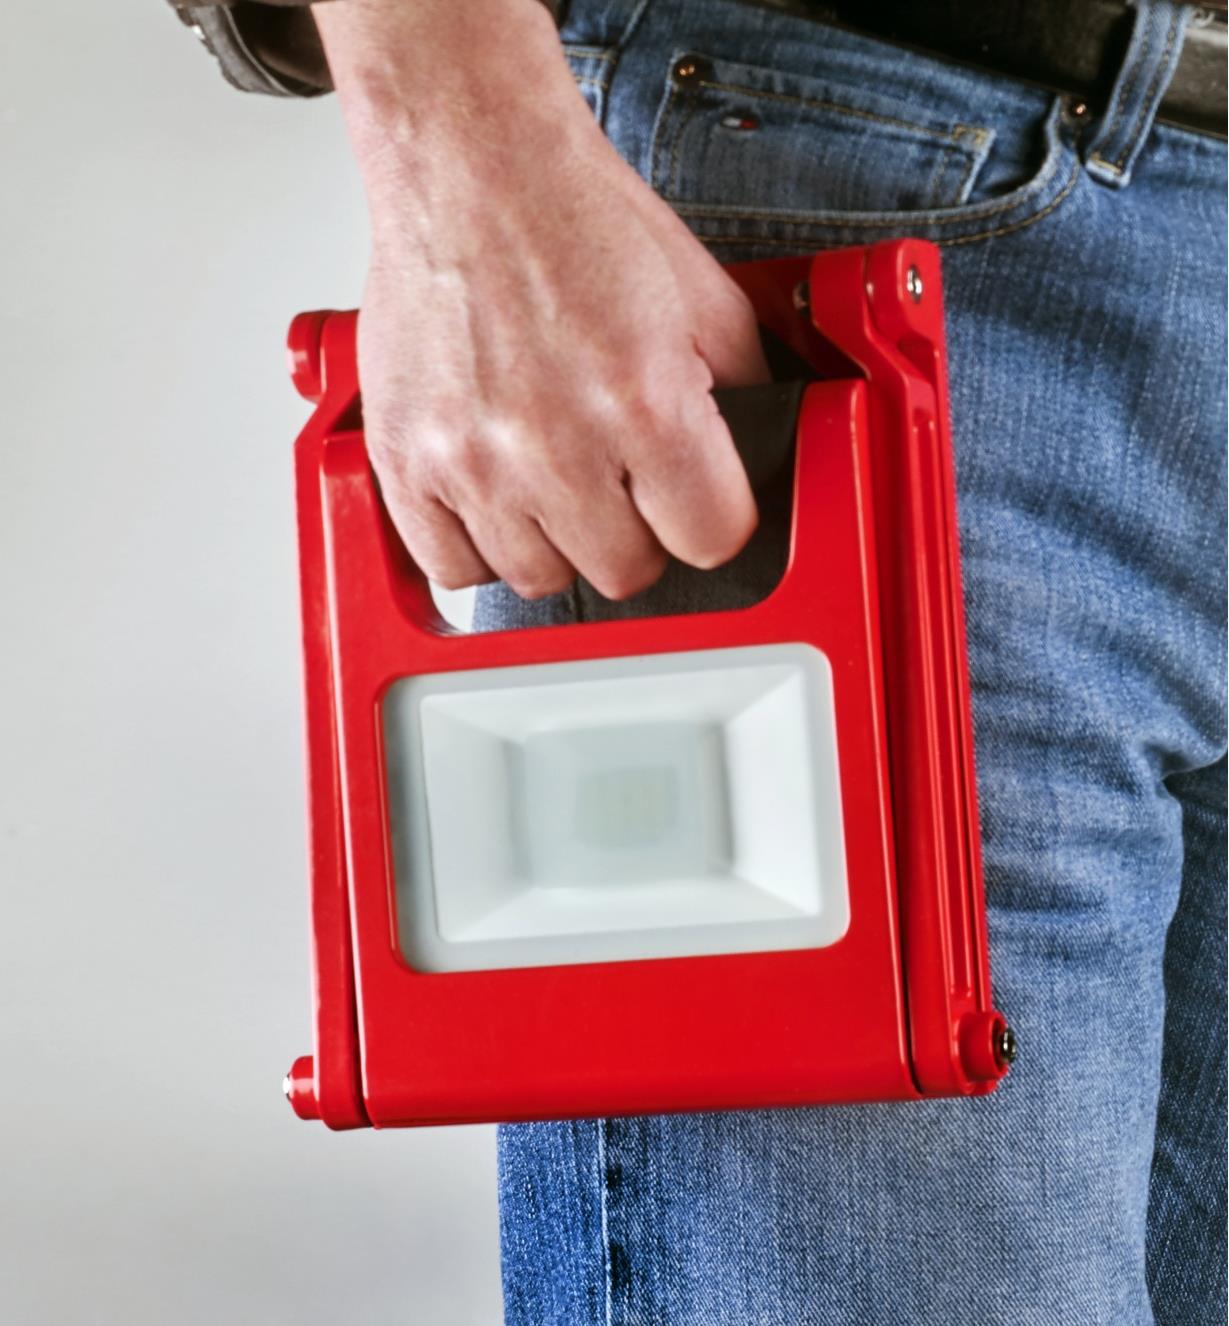 Carrying a rechargeable LED floodlight folded up for portability